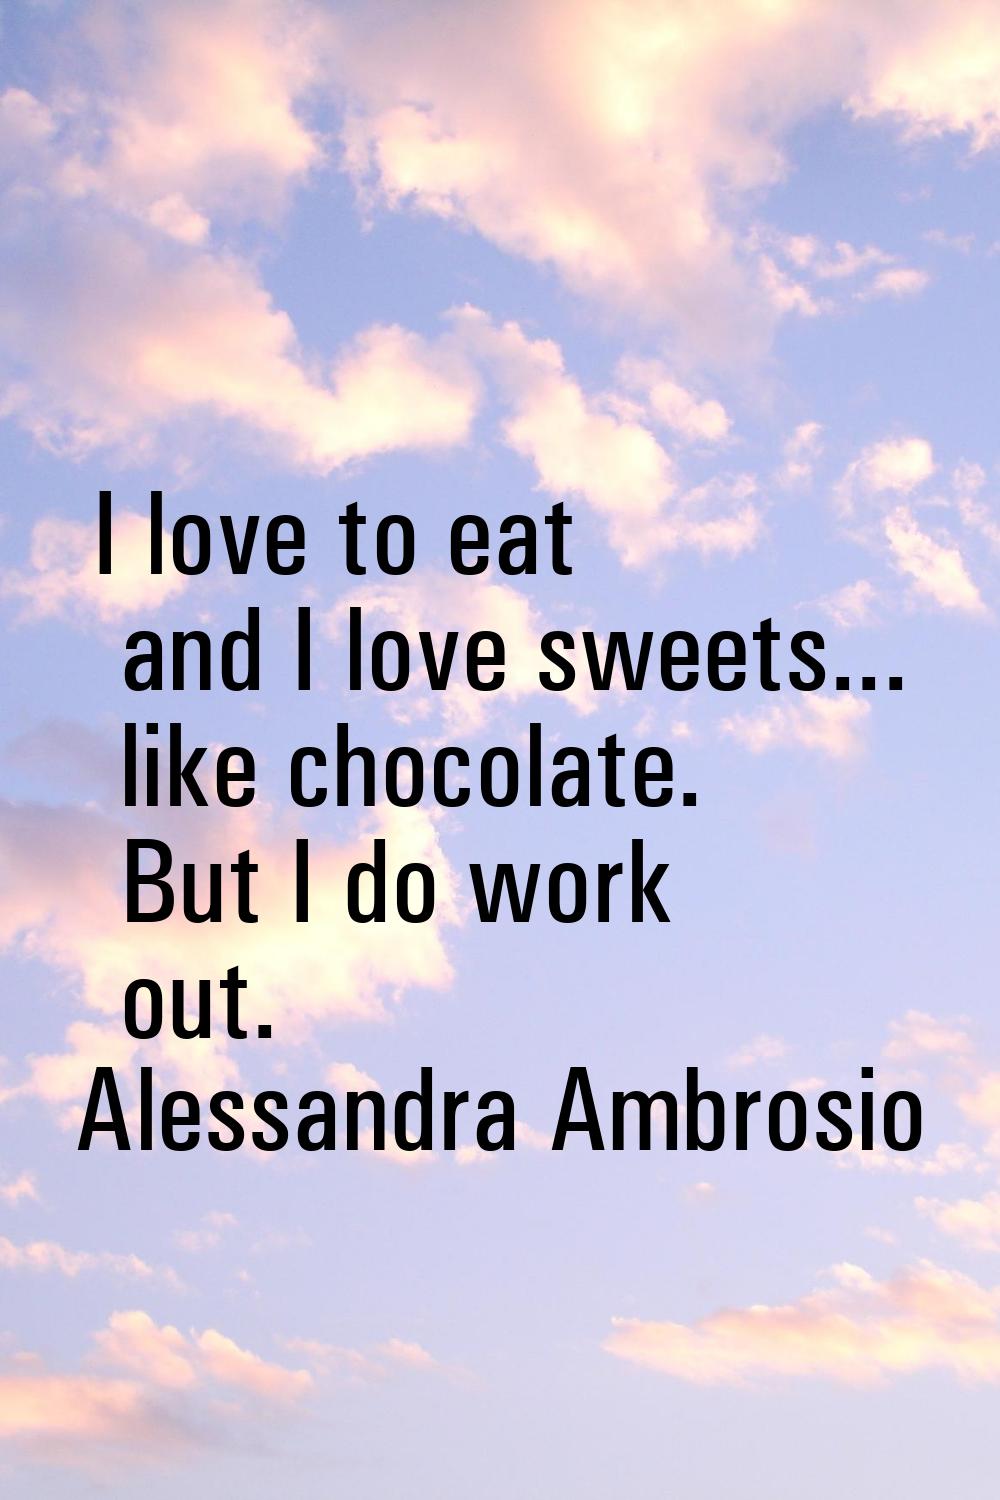 I love to eat and I love sweets... like chocolate. But I do work out.